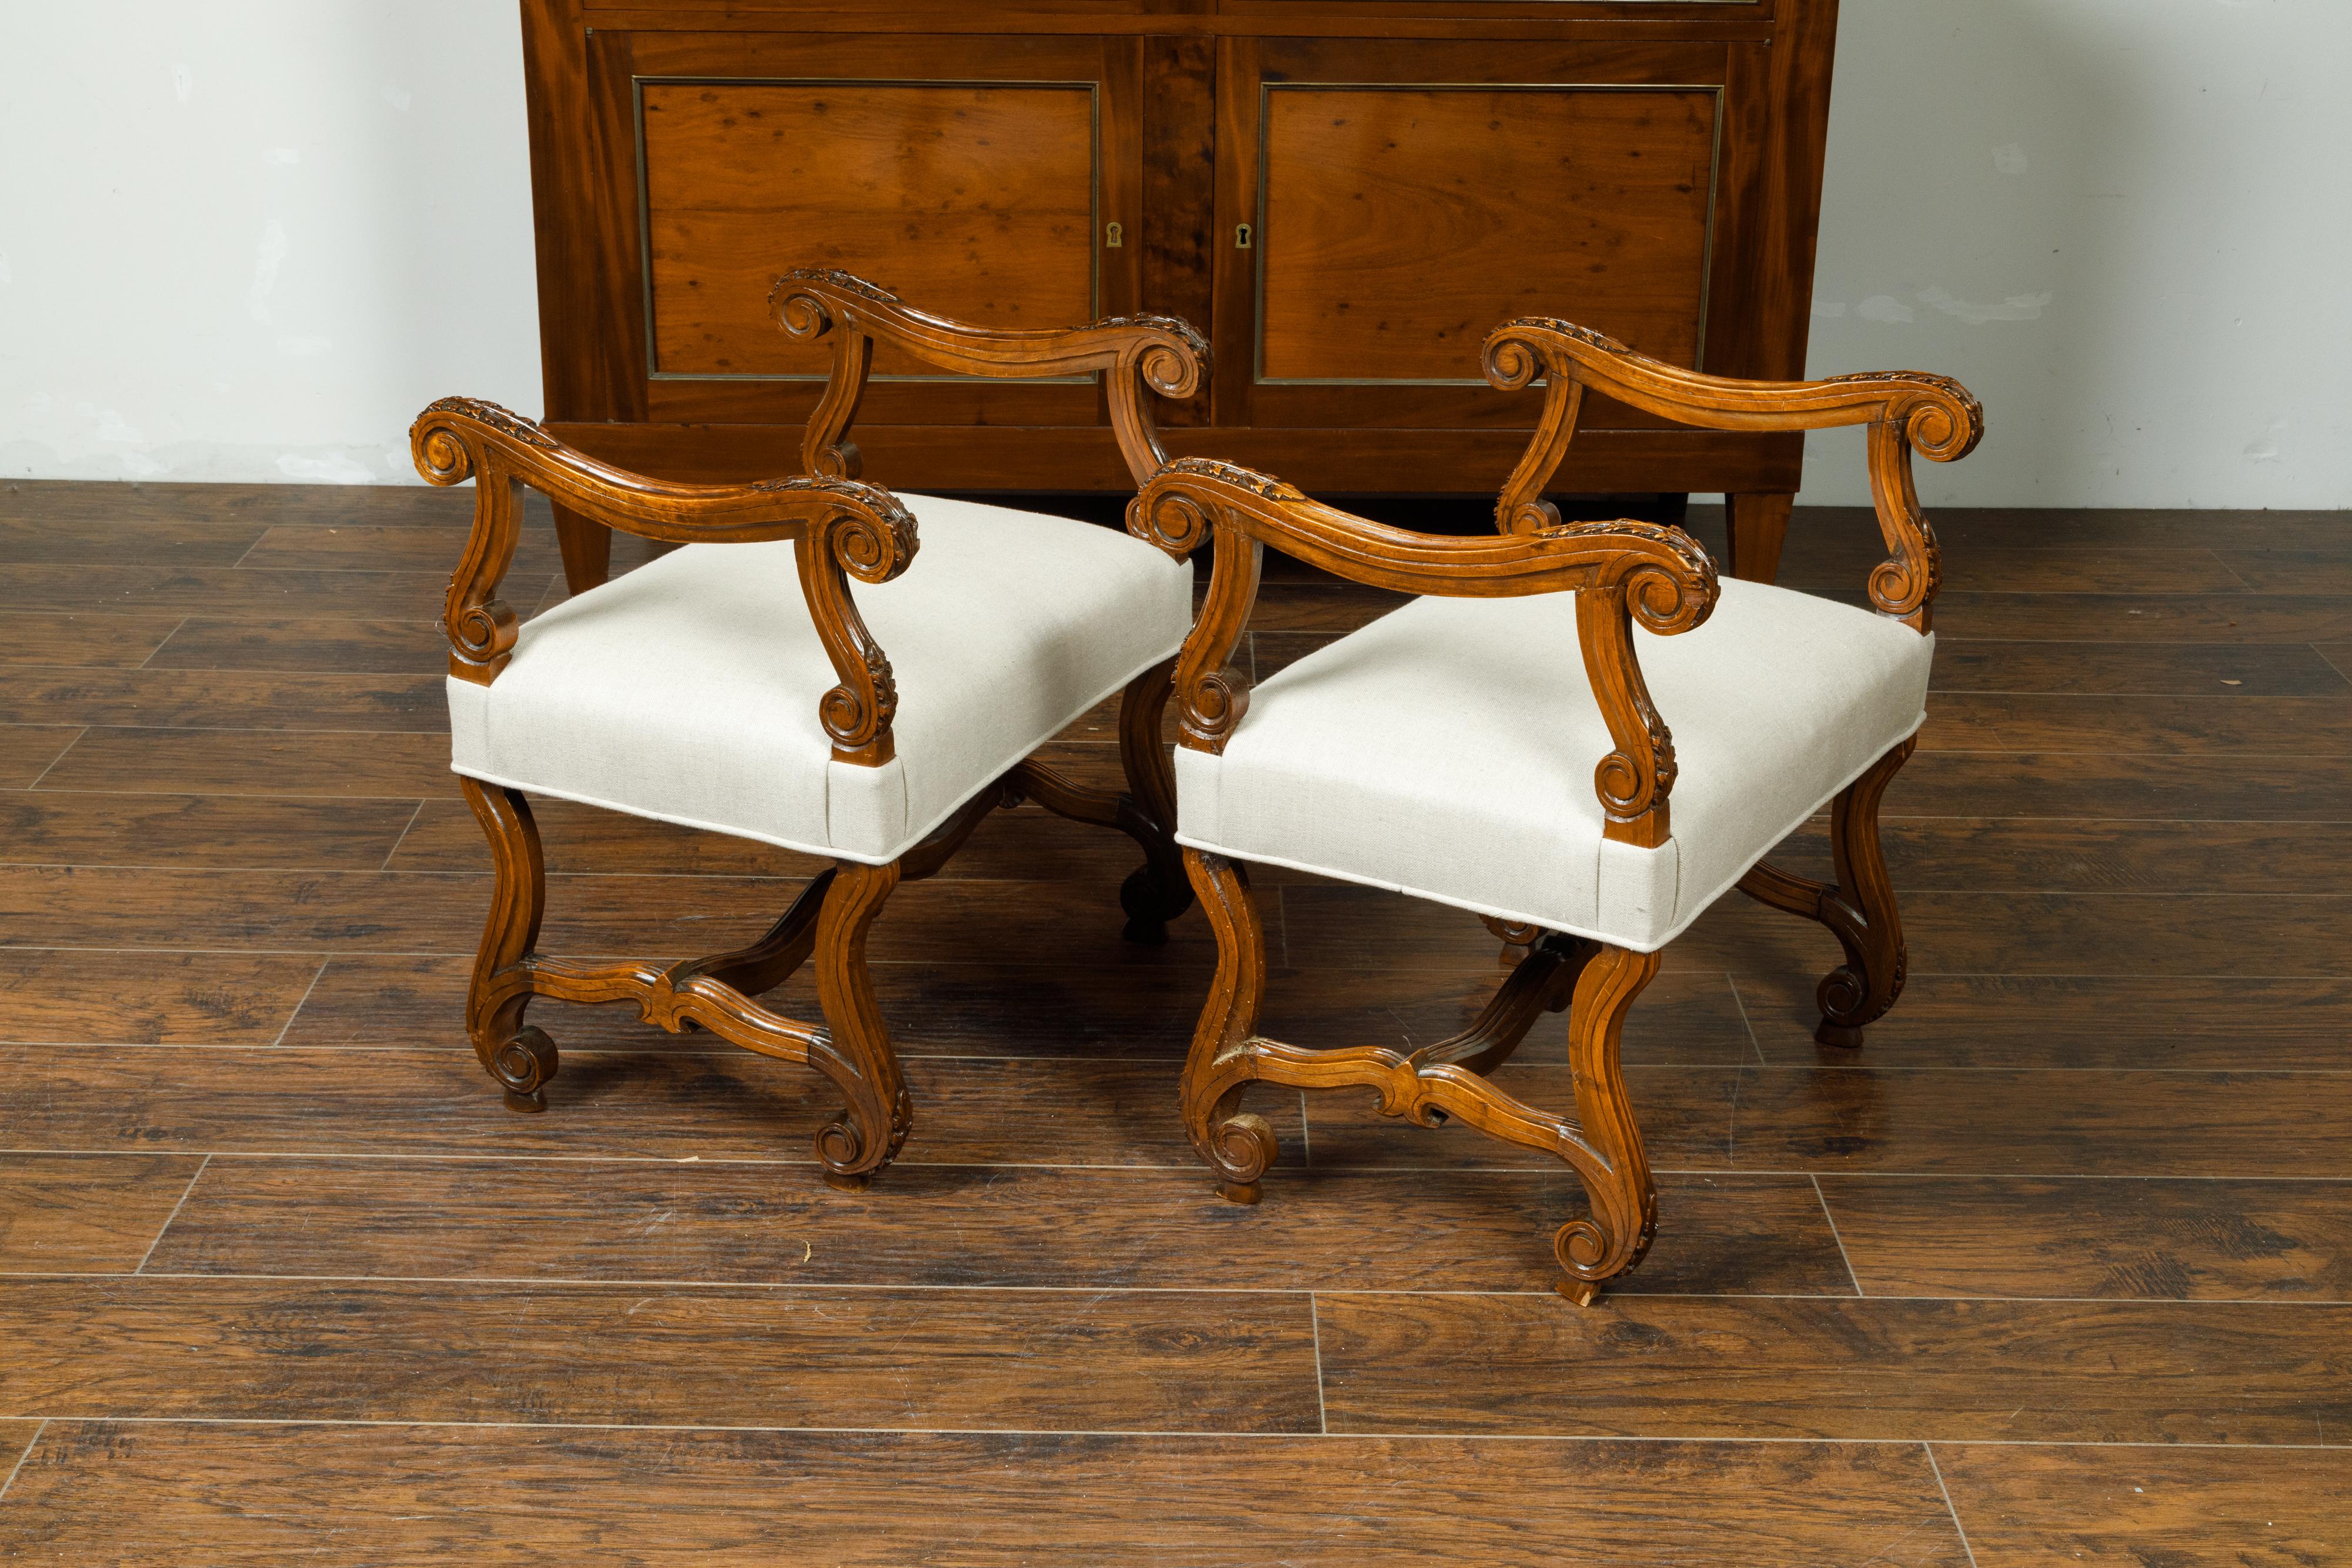 Napoleon III French Napoléon III 1870s Walnut Upholstered Stools with Scrolling Accents For Sale